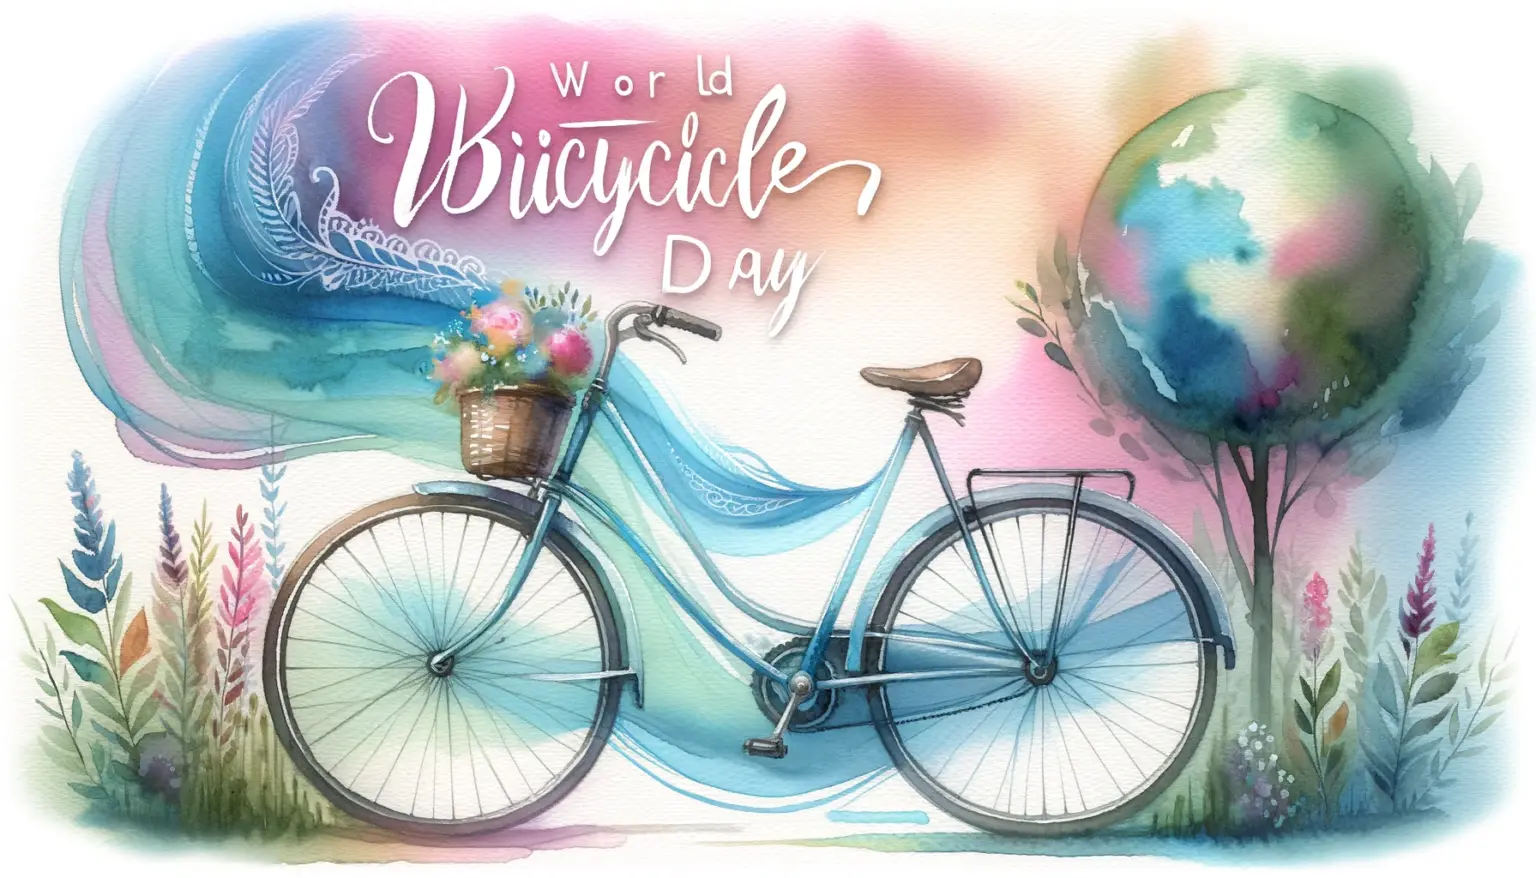 Inspirational Messages for World Bicycle Day